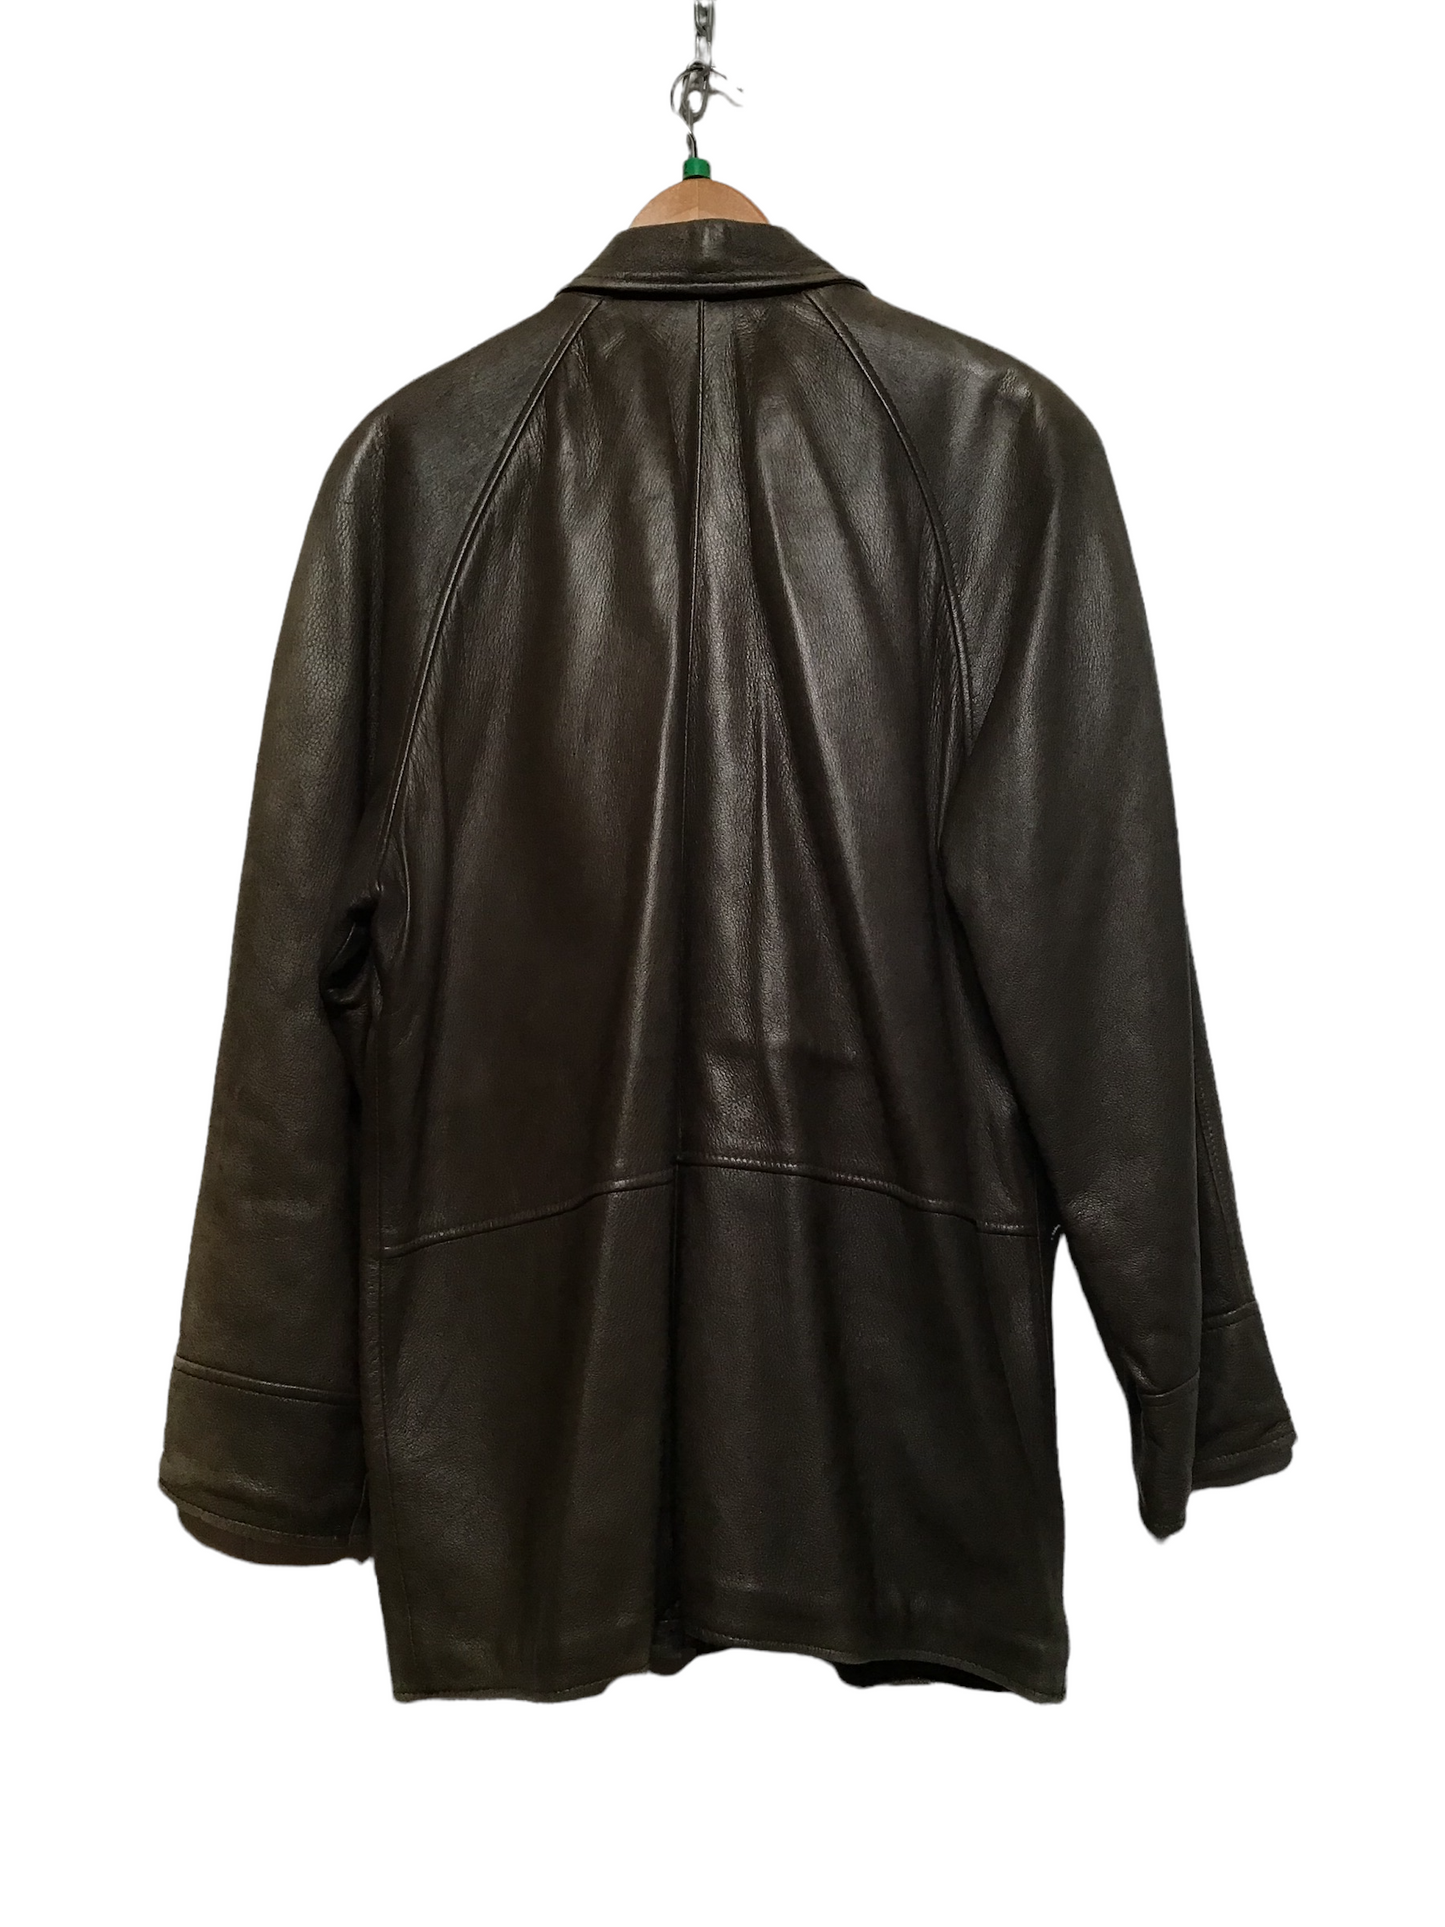 Muted Green Leather Coat (Size XL)